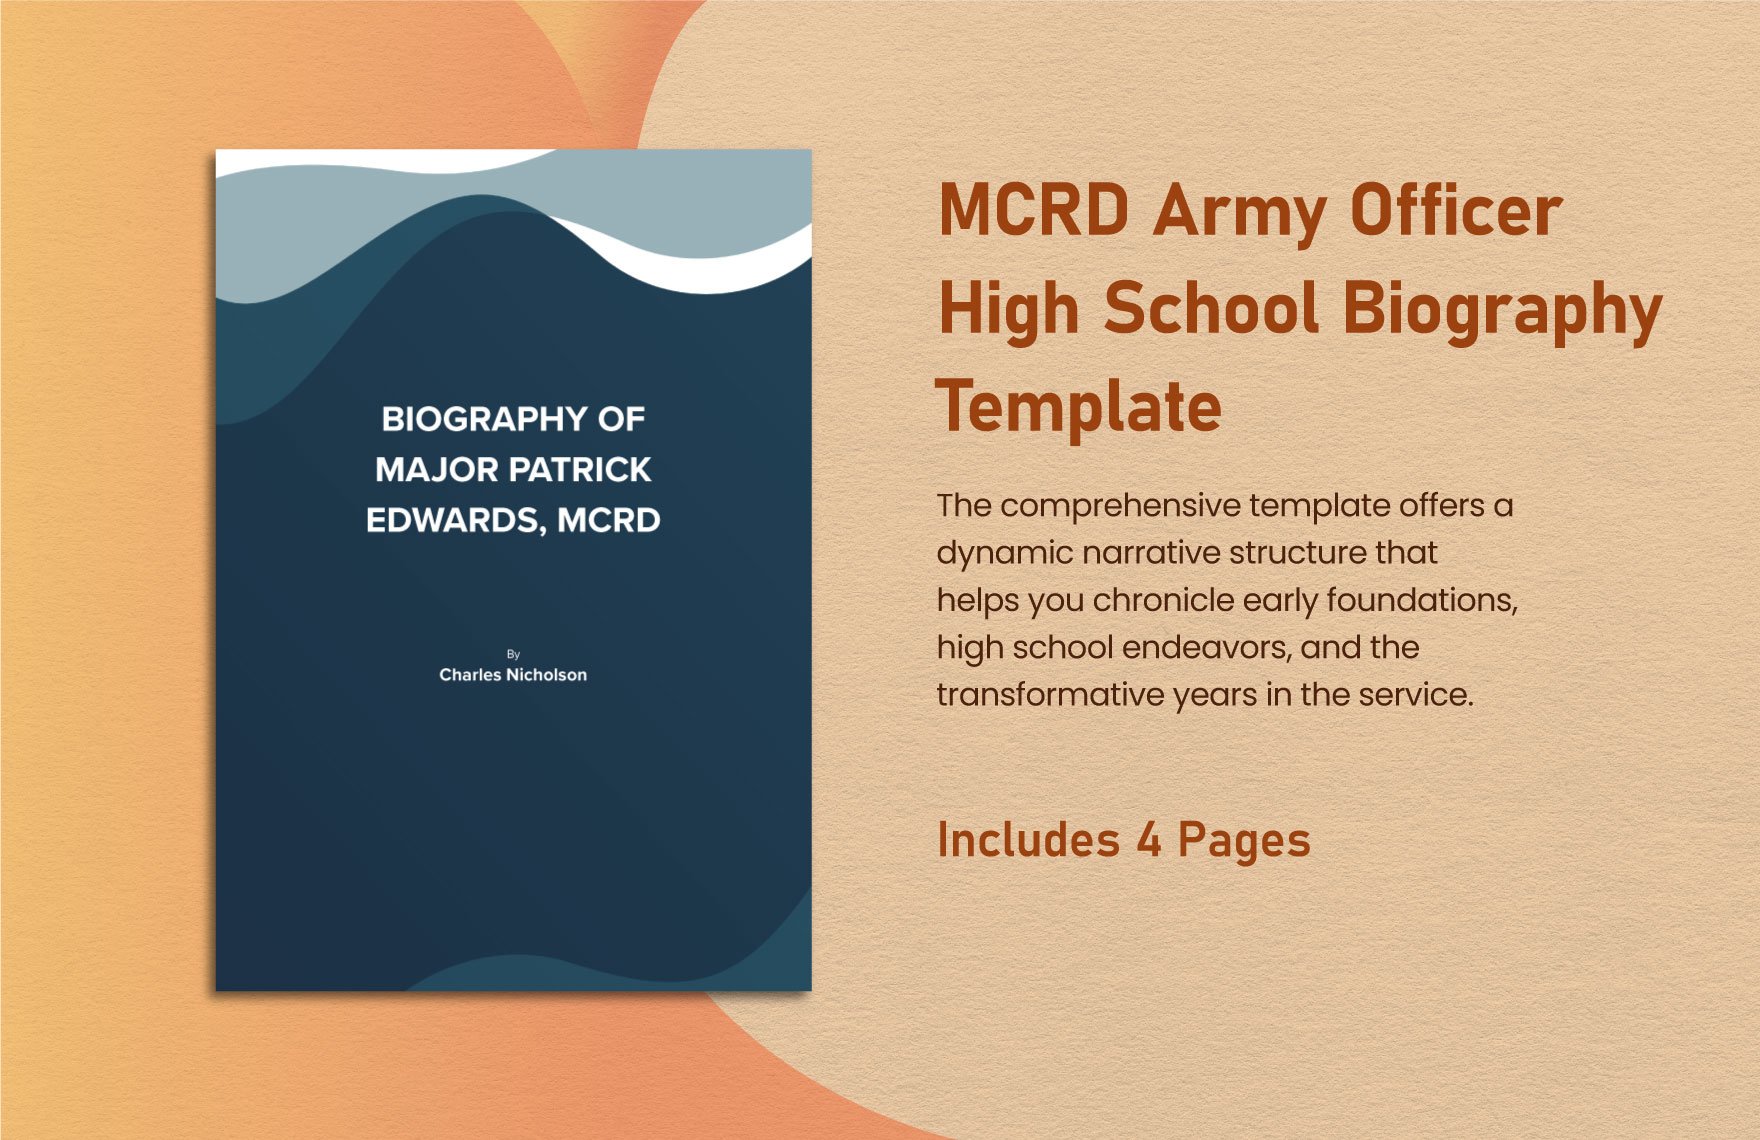 MCRD Army Officer High School Biography Template